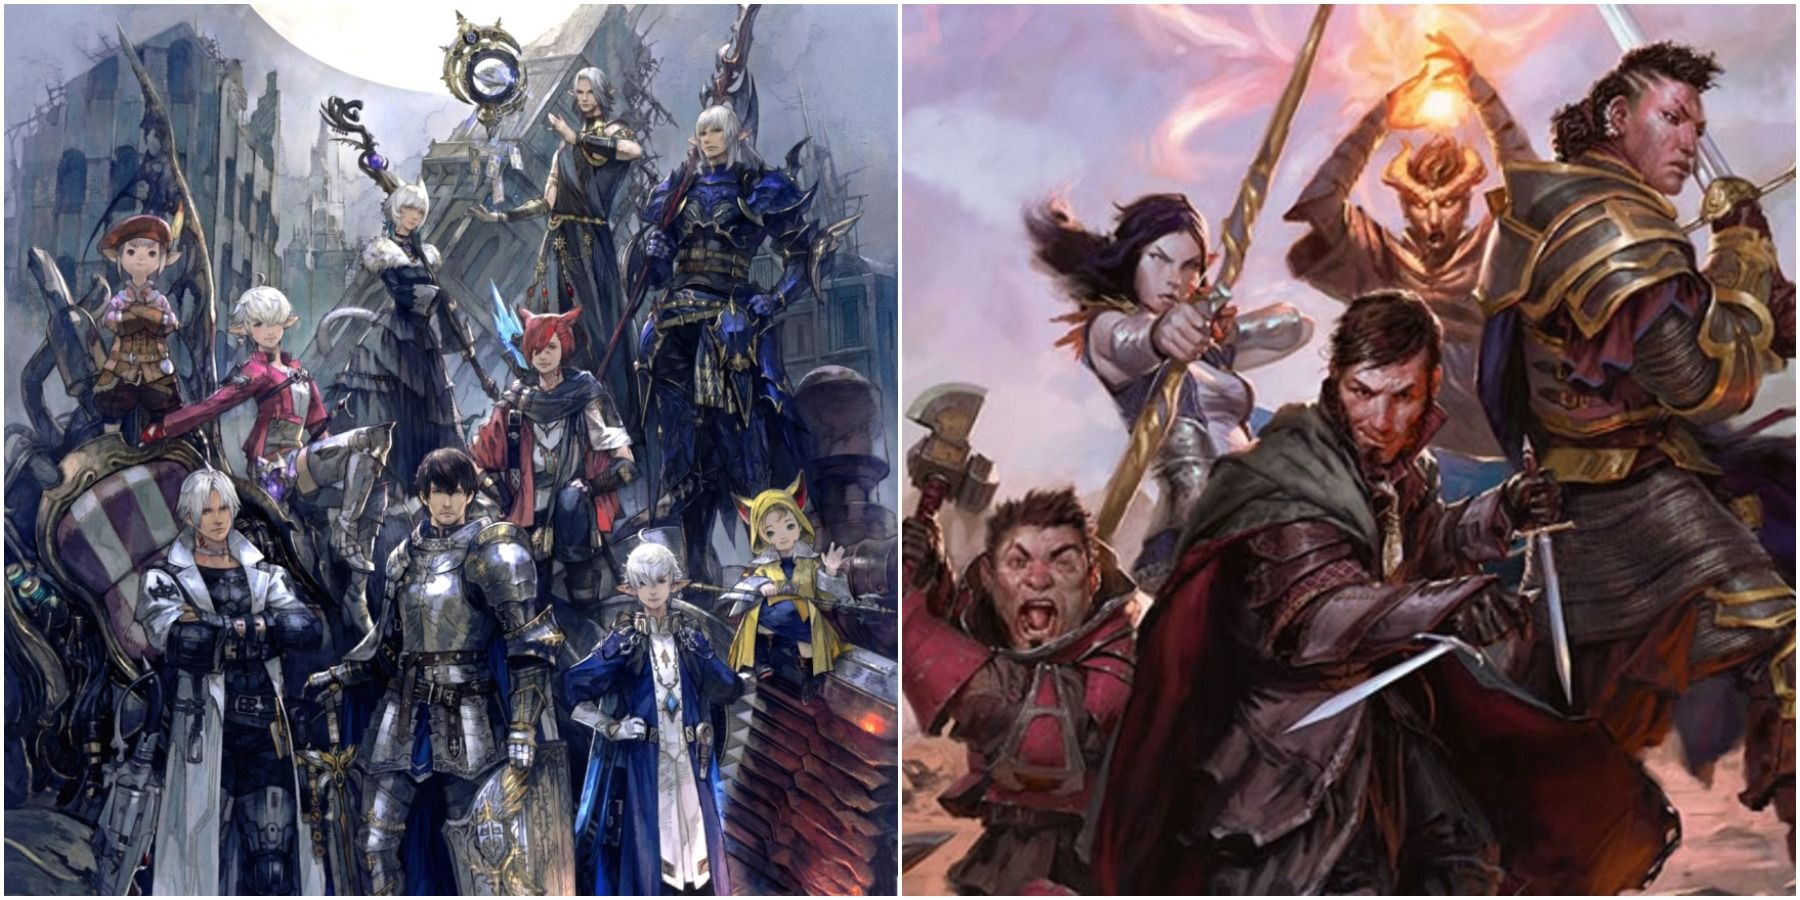 Announcing the FINAL FANTASY XIV TTRPG (Tabletop Role-Playing Game